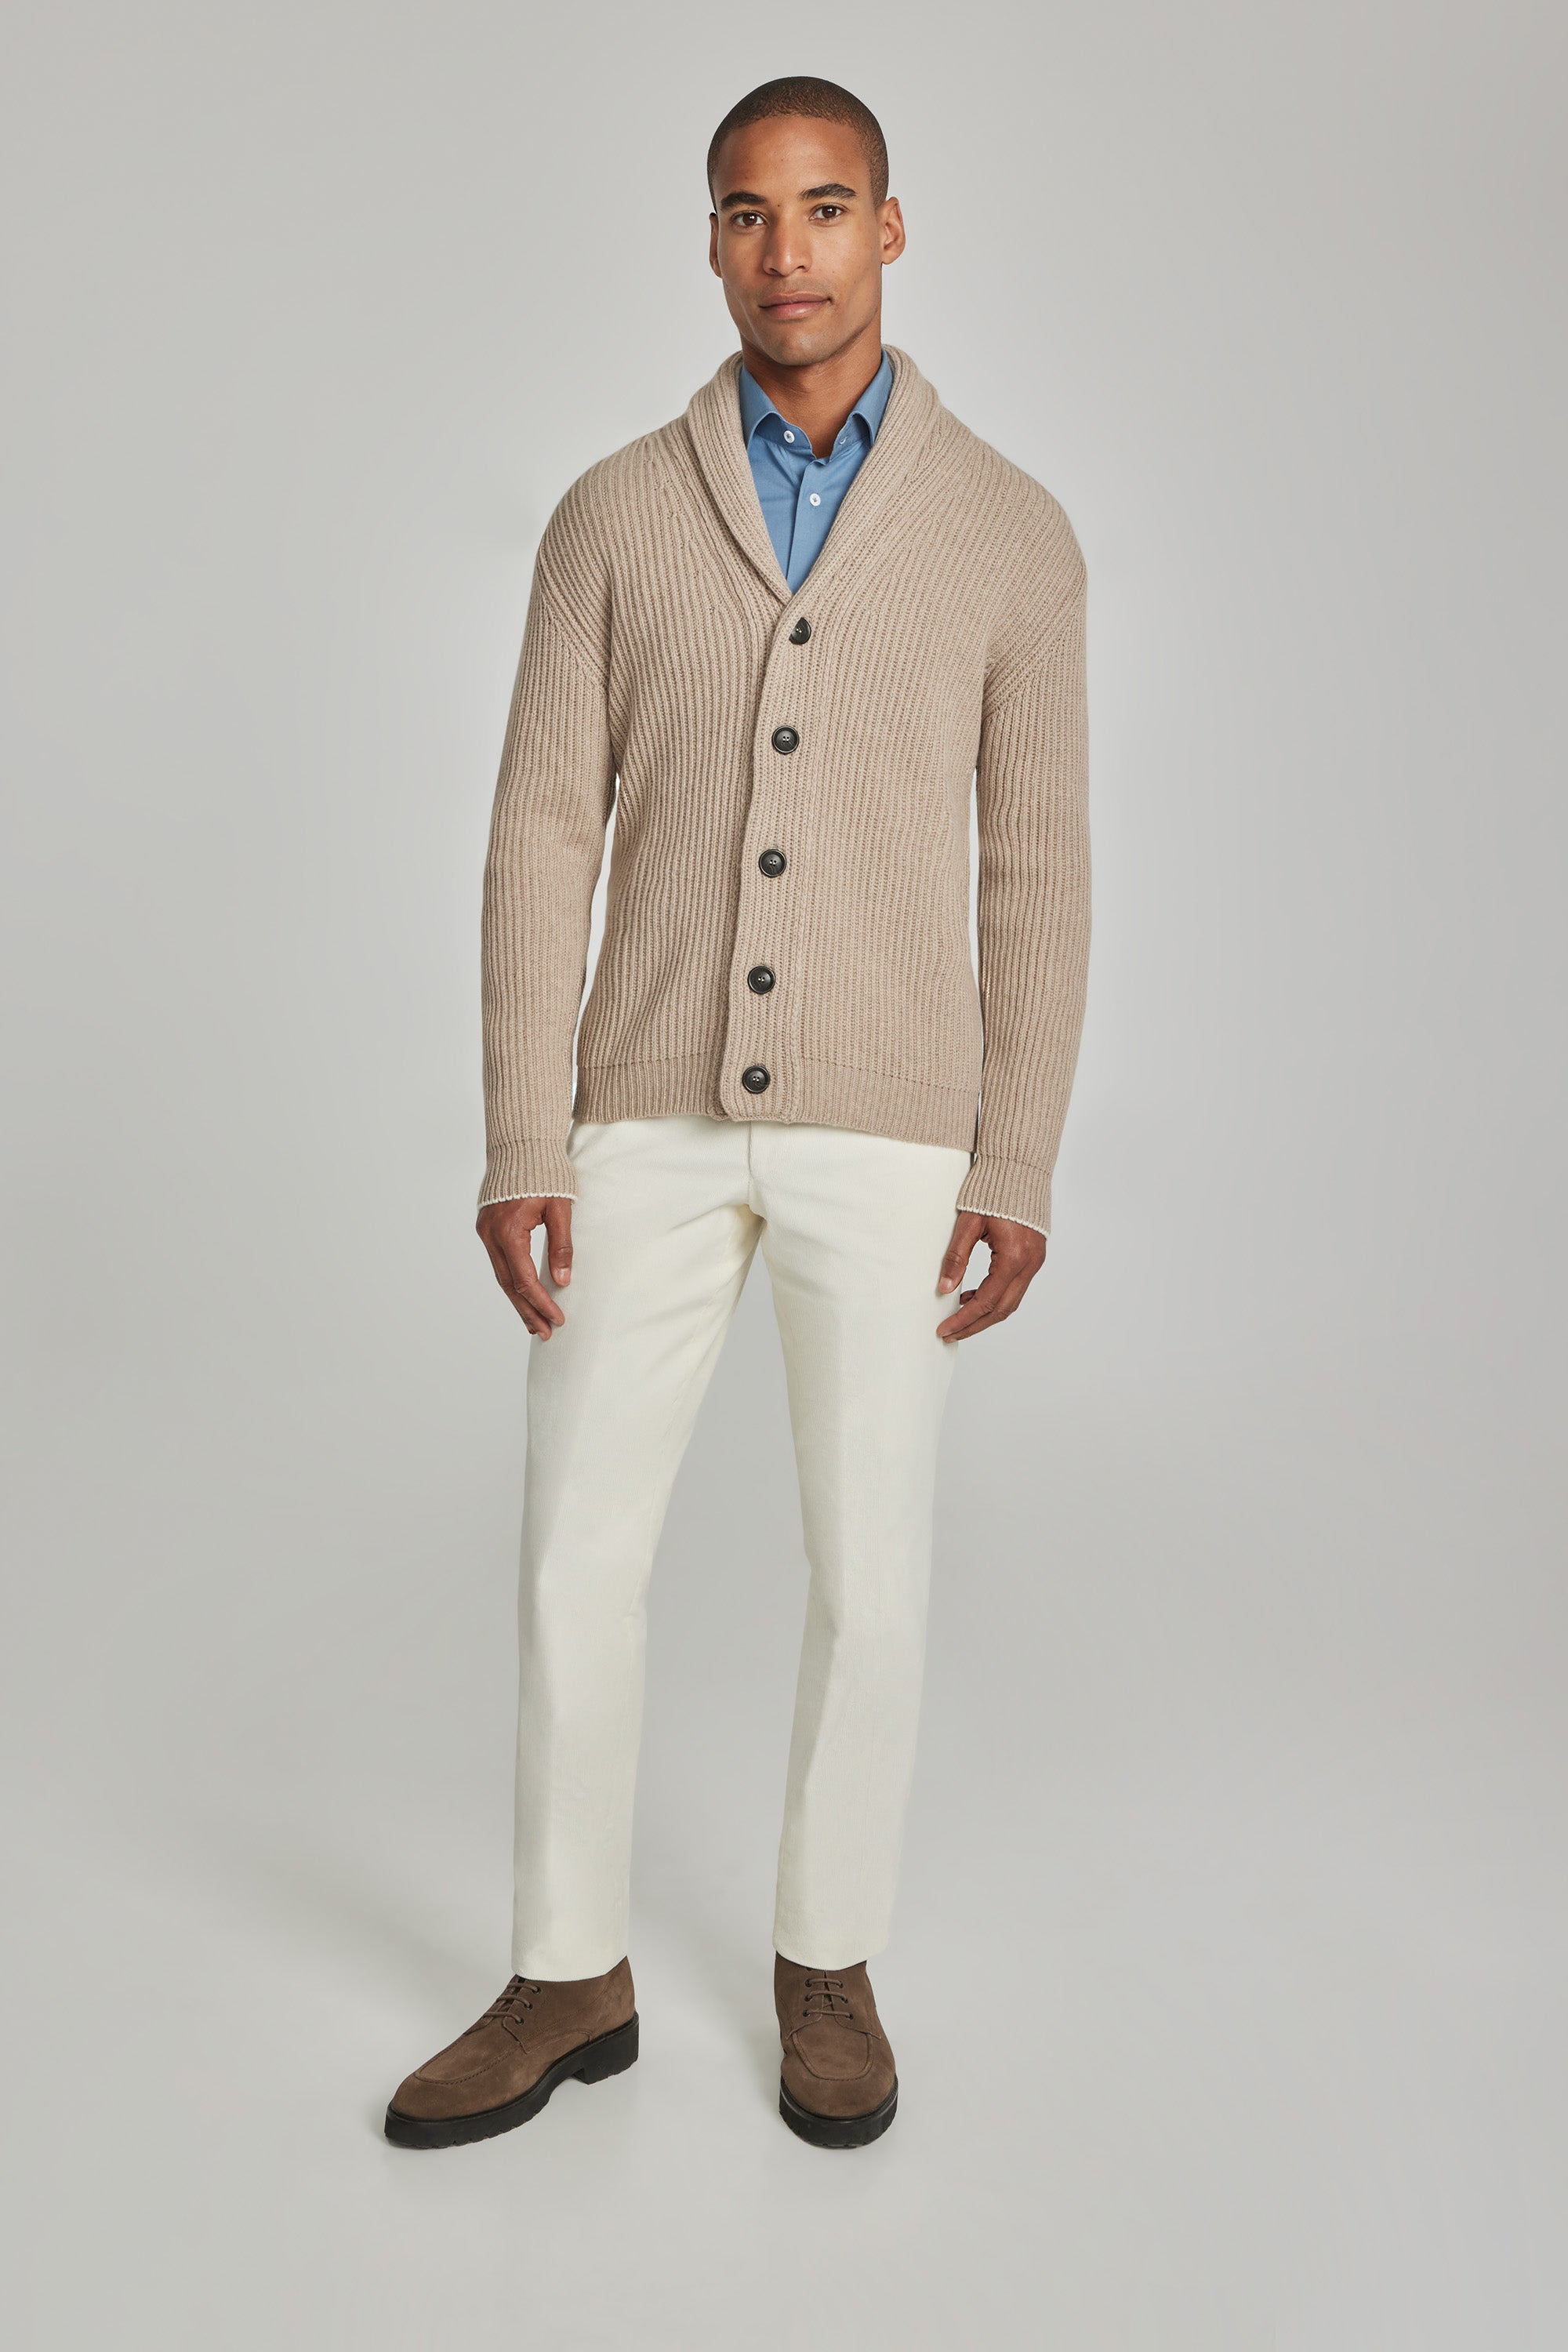 Alt view Stayner Camel Solid Cashmere and Wool Shawl Cardigan